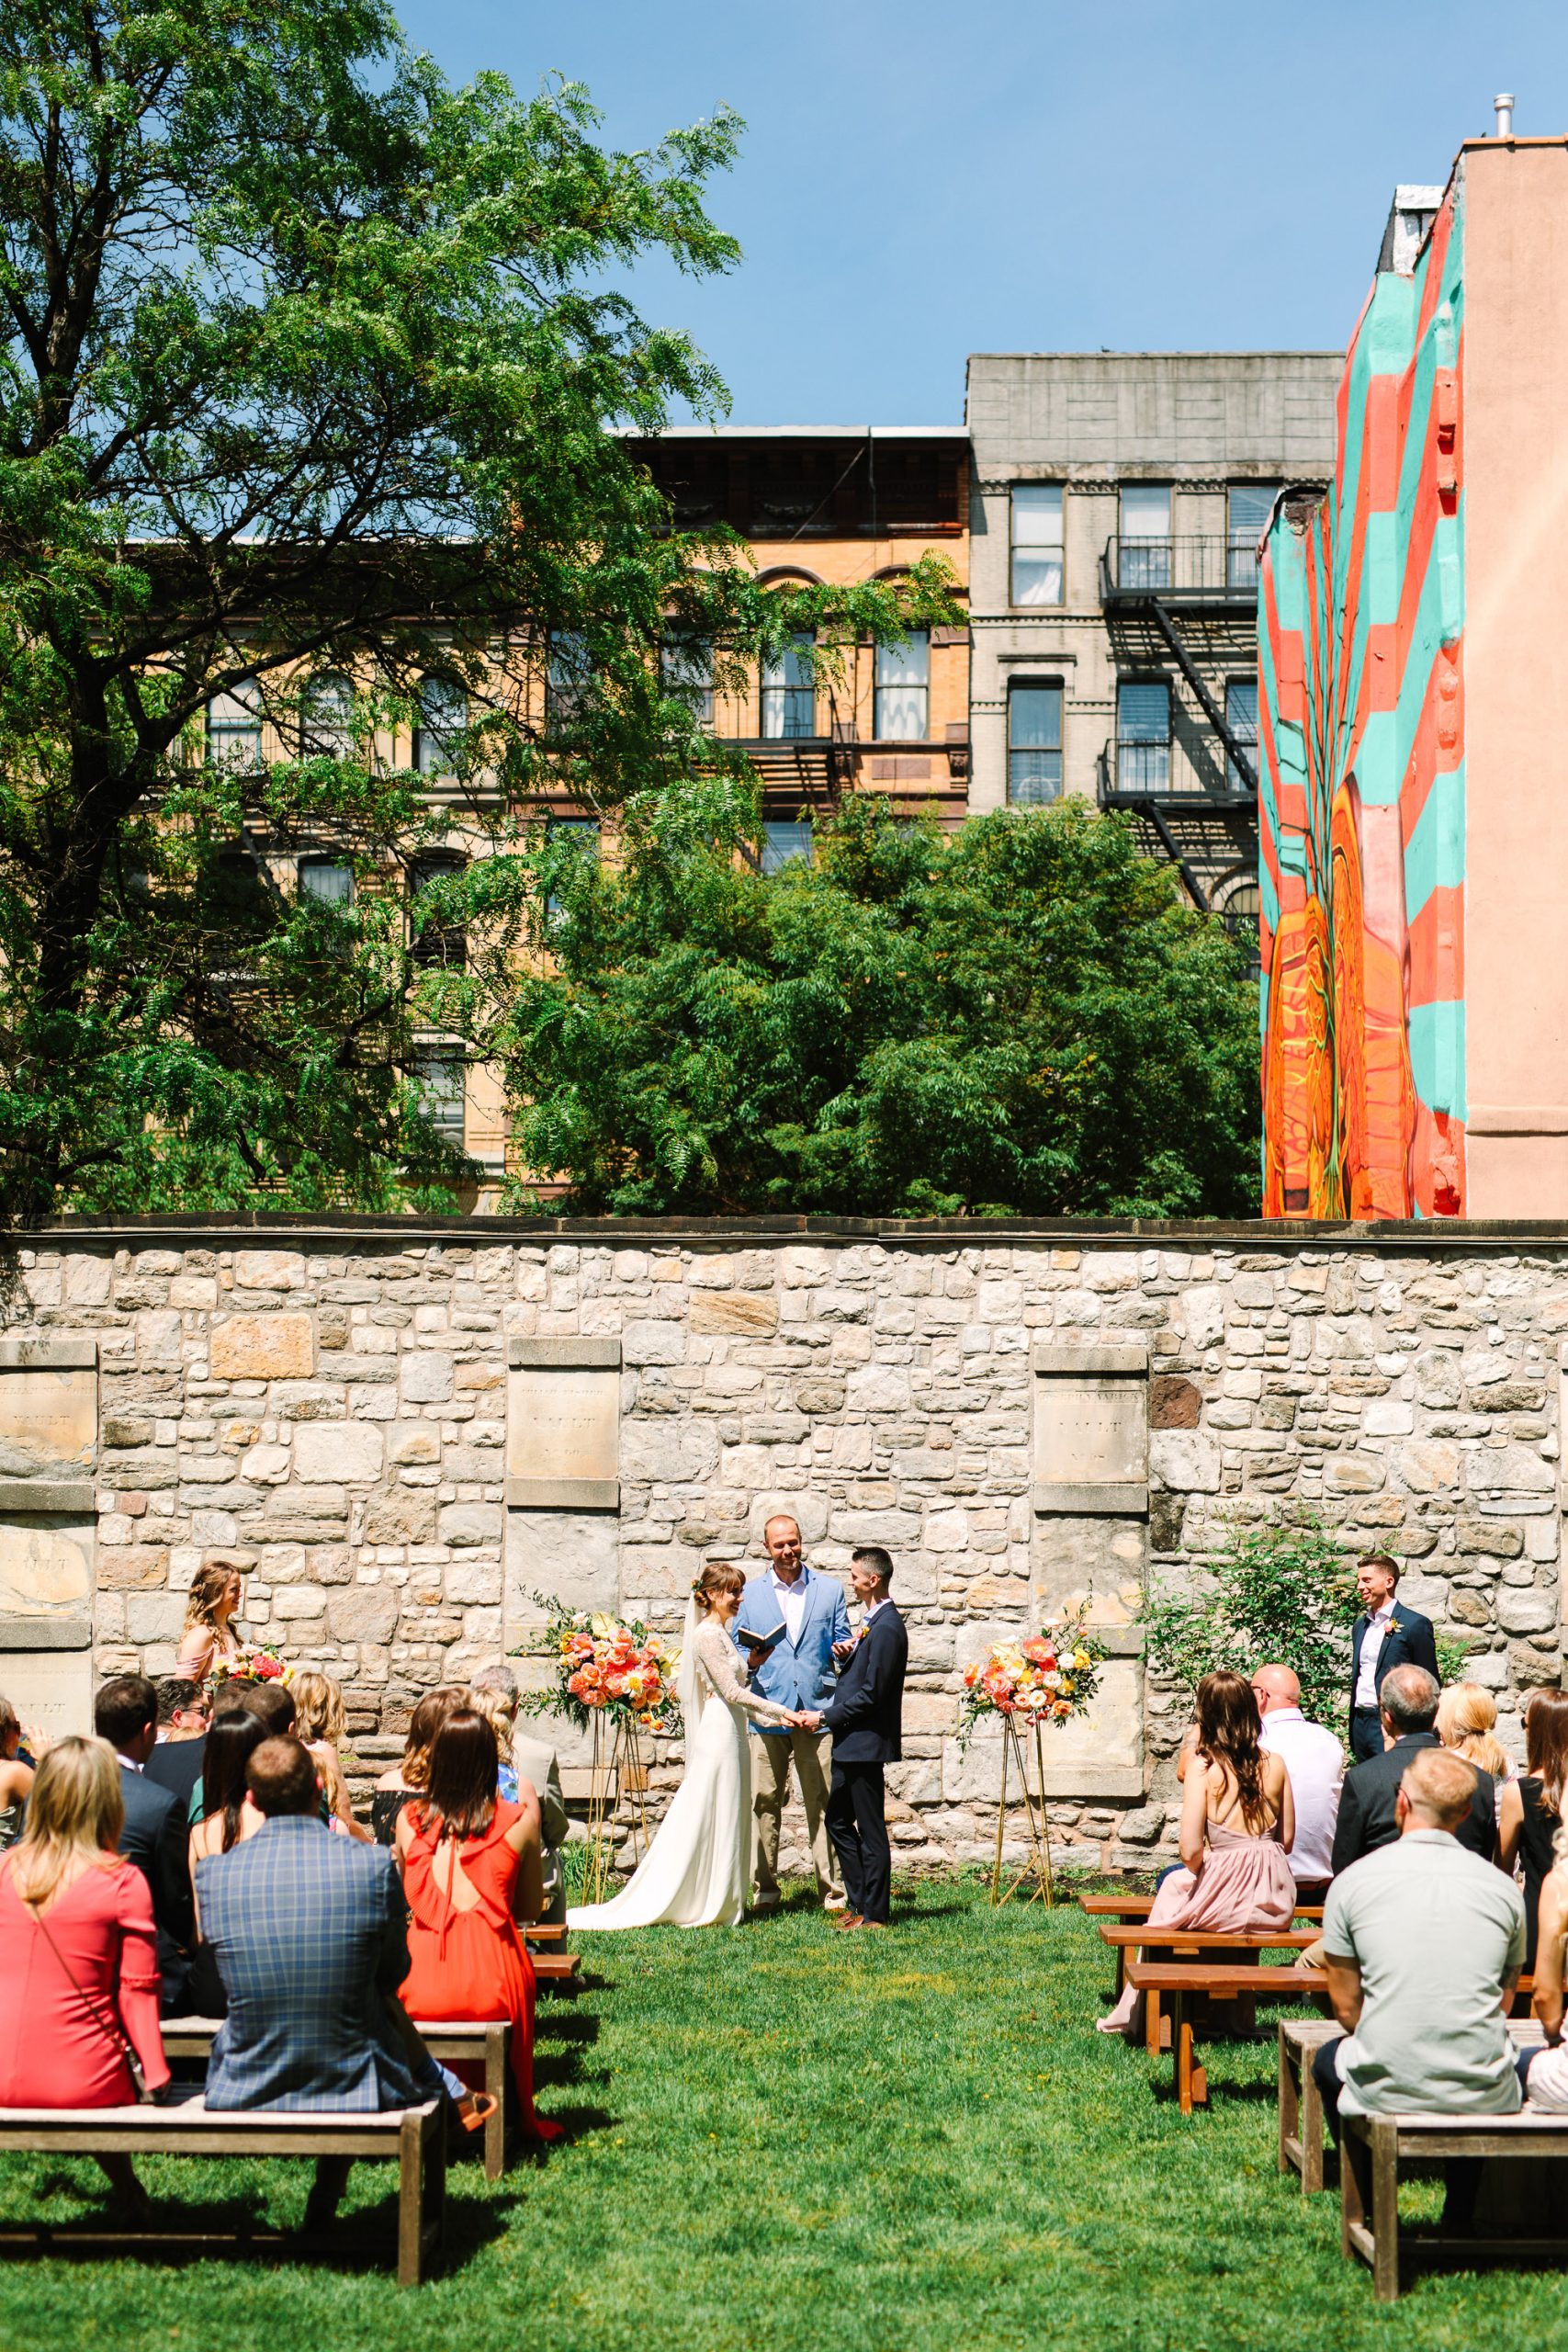 Wedding ceremony in NYC by Mary Costa Photography